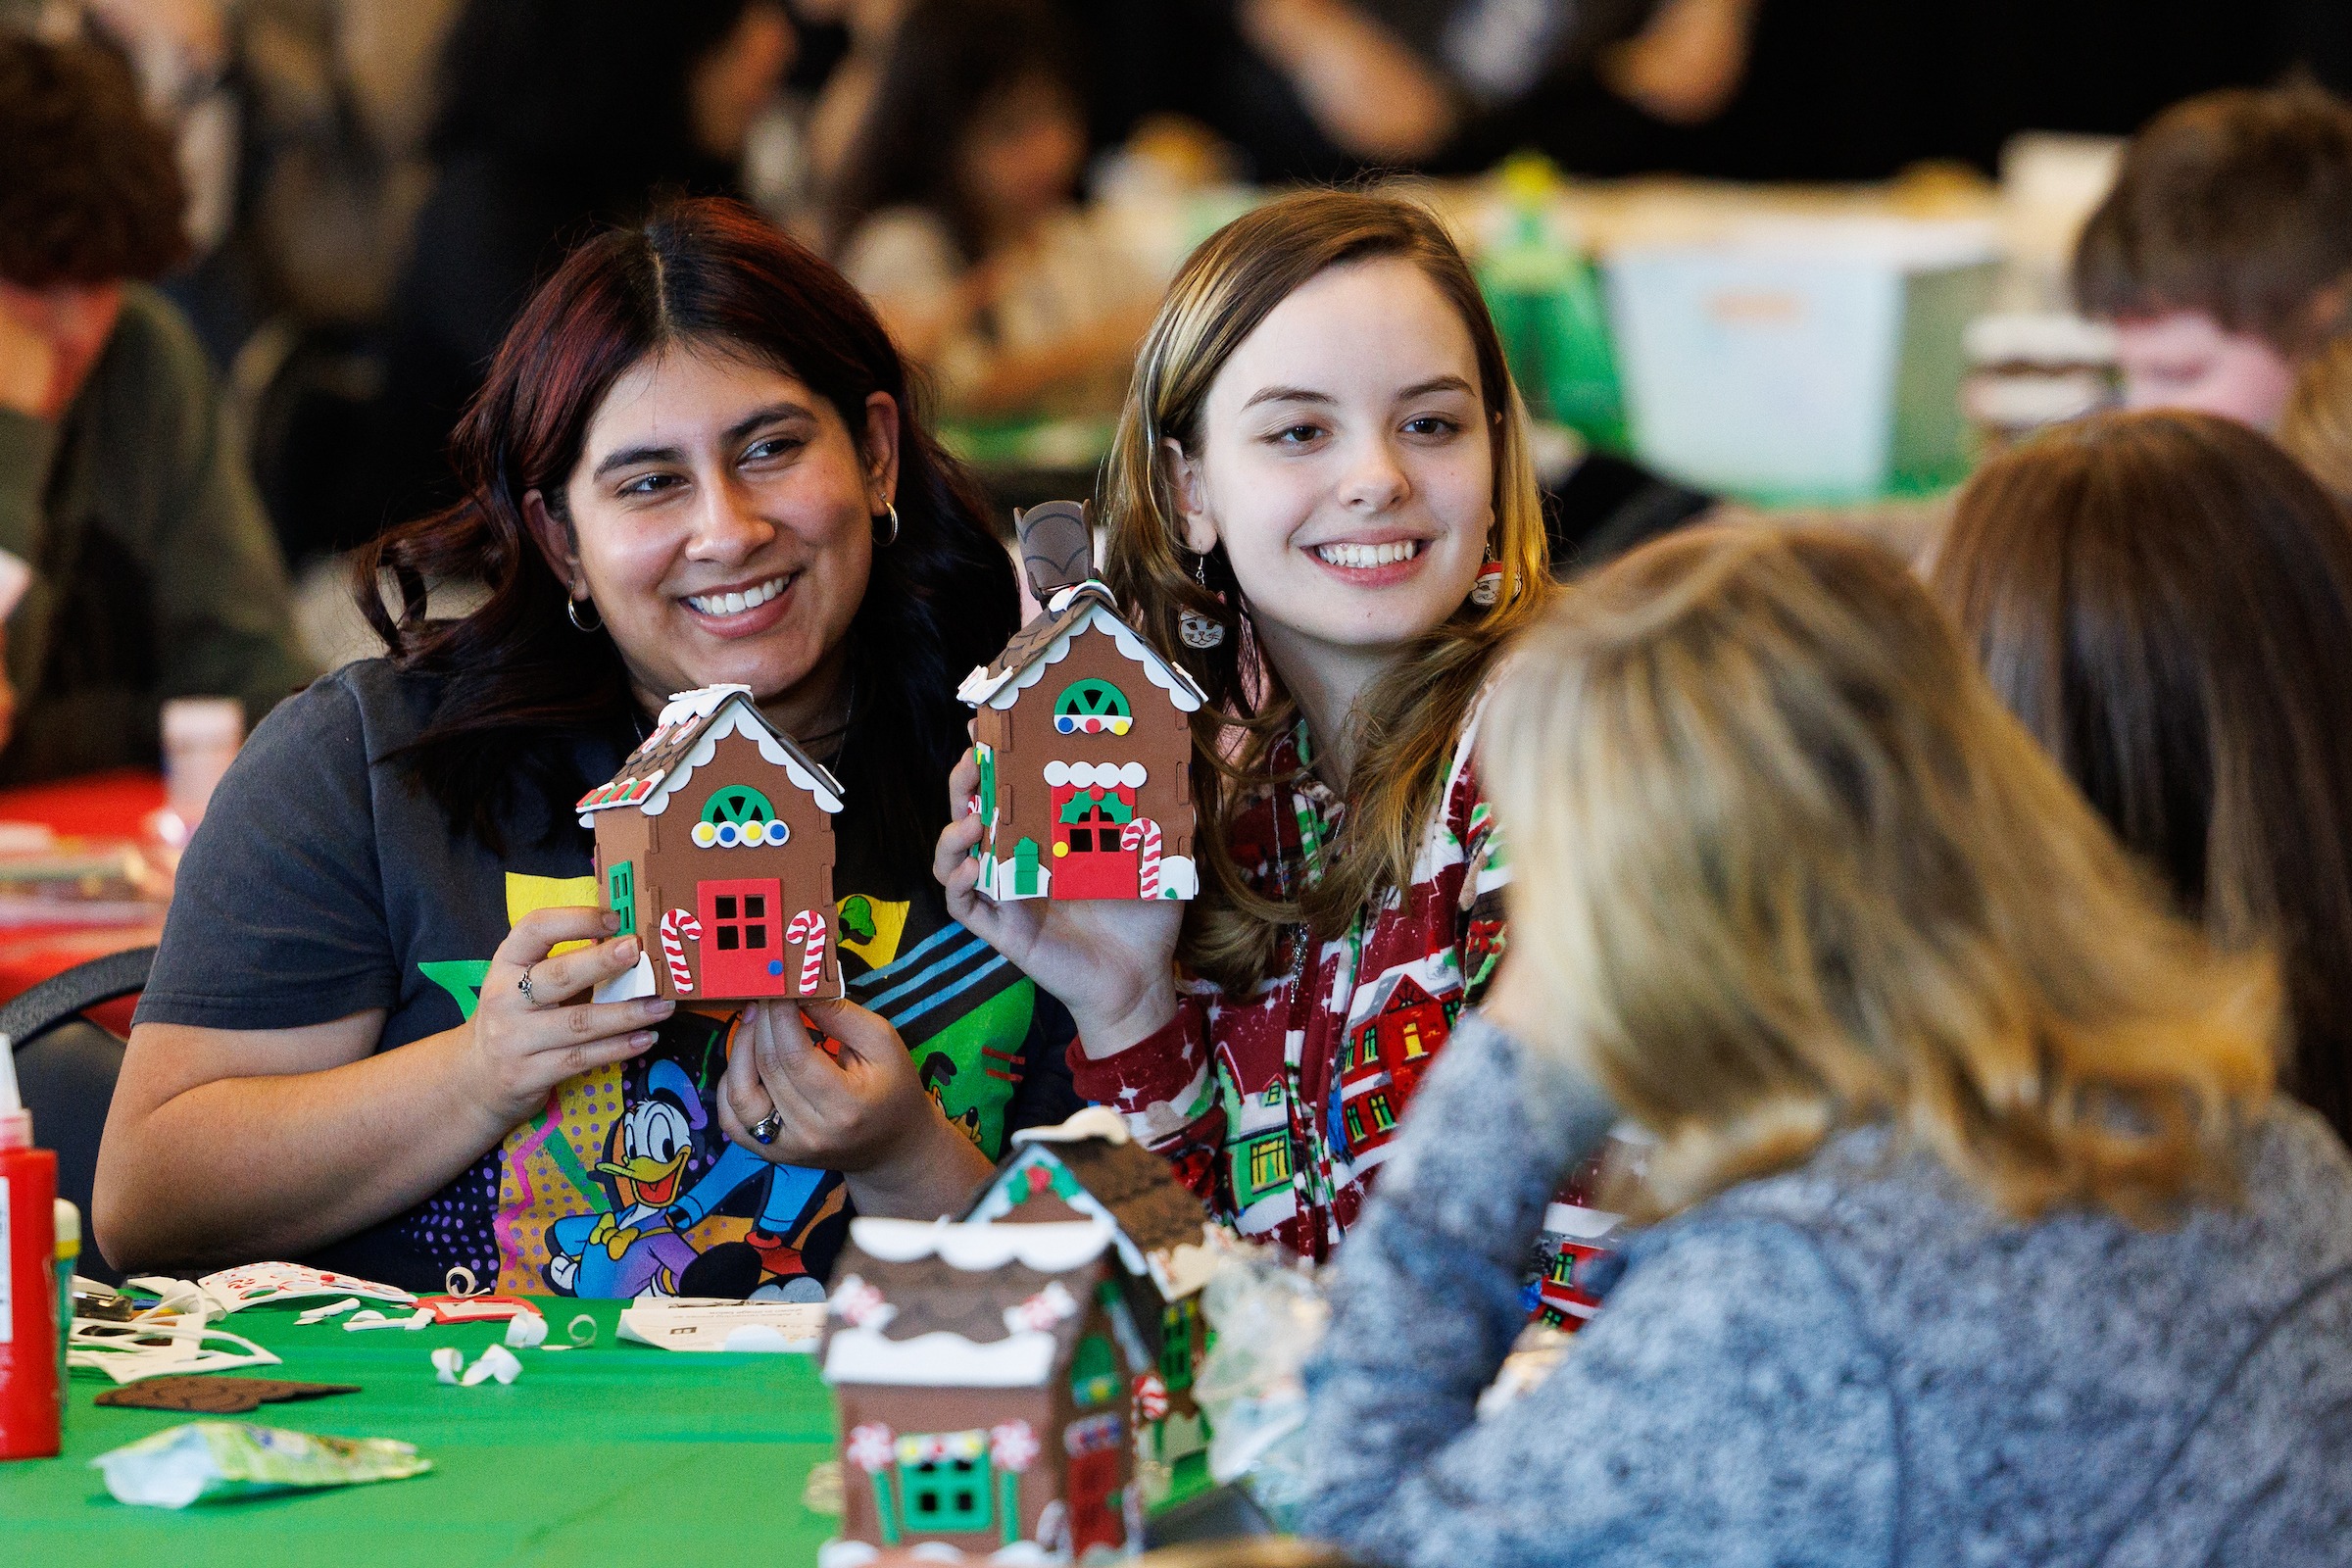 Two LUOA students building gingerbread houses at the Christmas Party